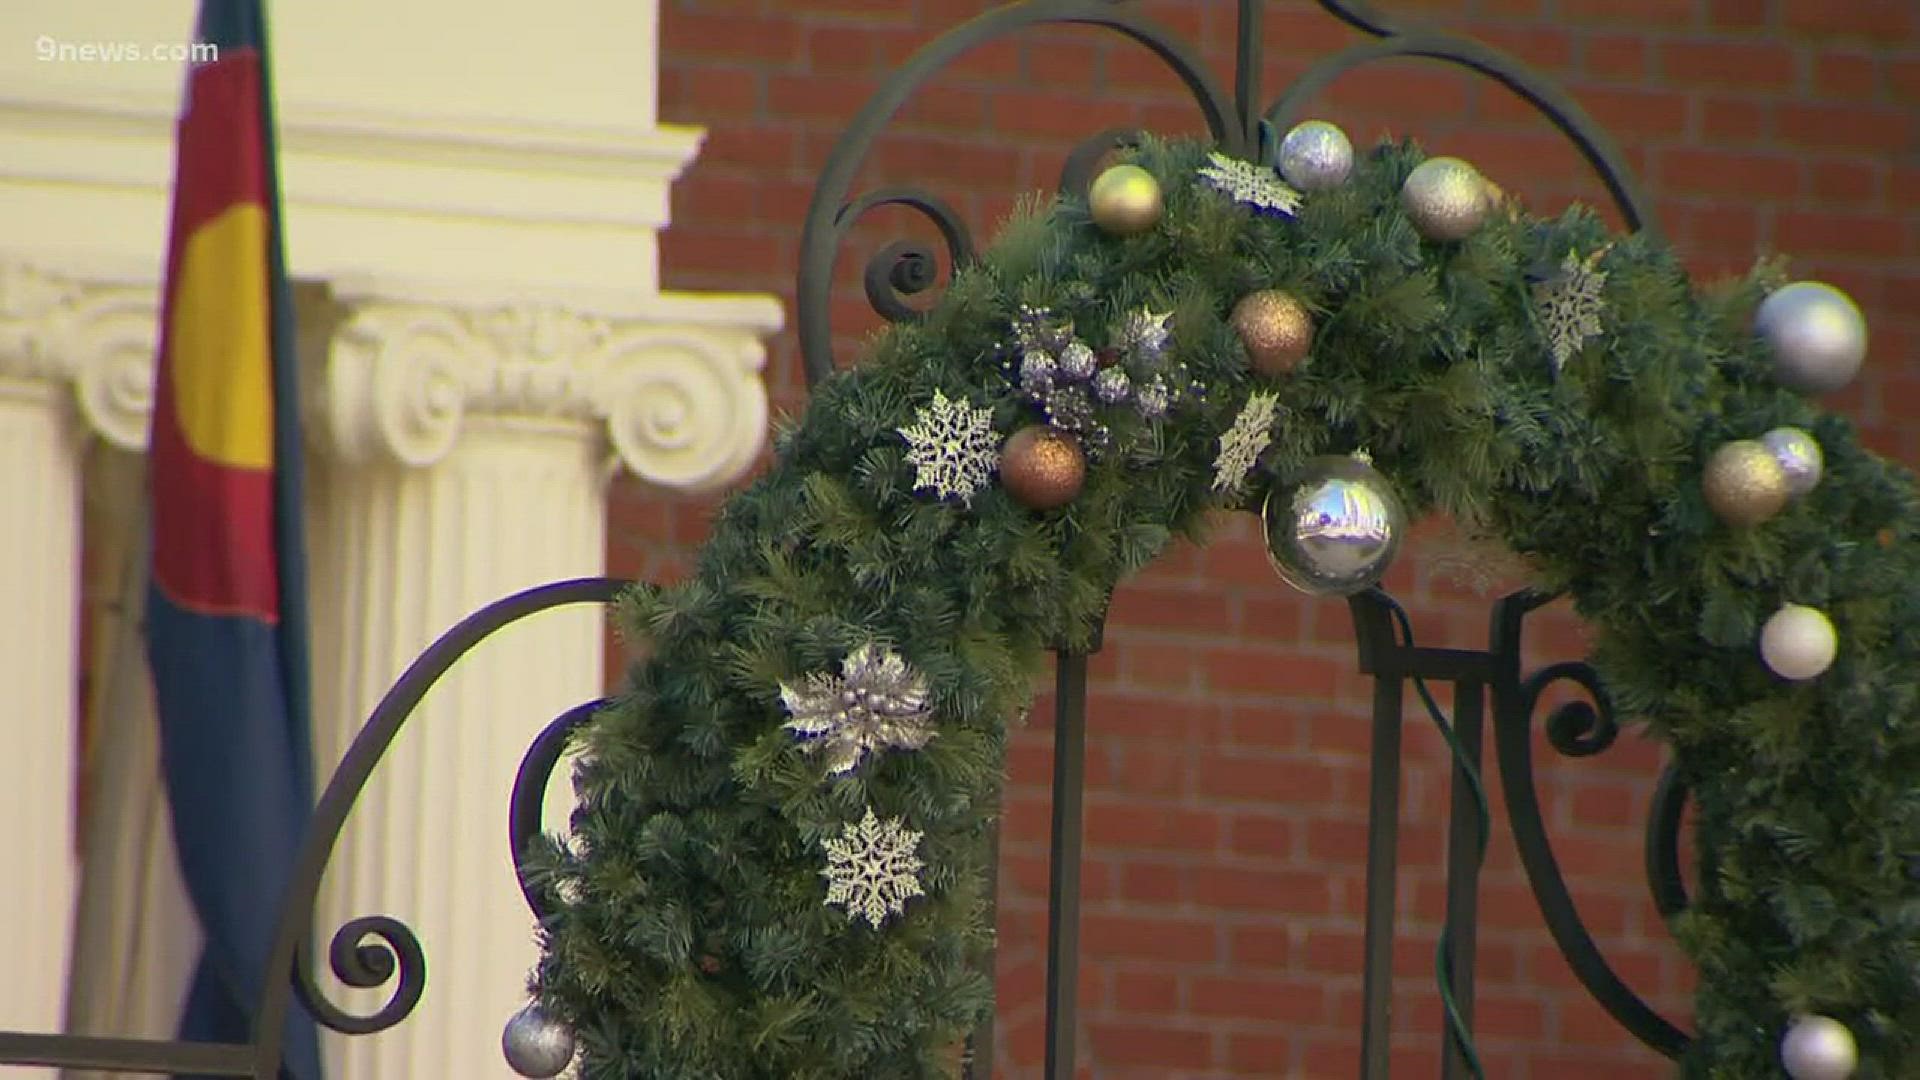 This year there's a 'decades of design' theme and each room honors a different time and place in Colorado history with its holiday decorations.